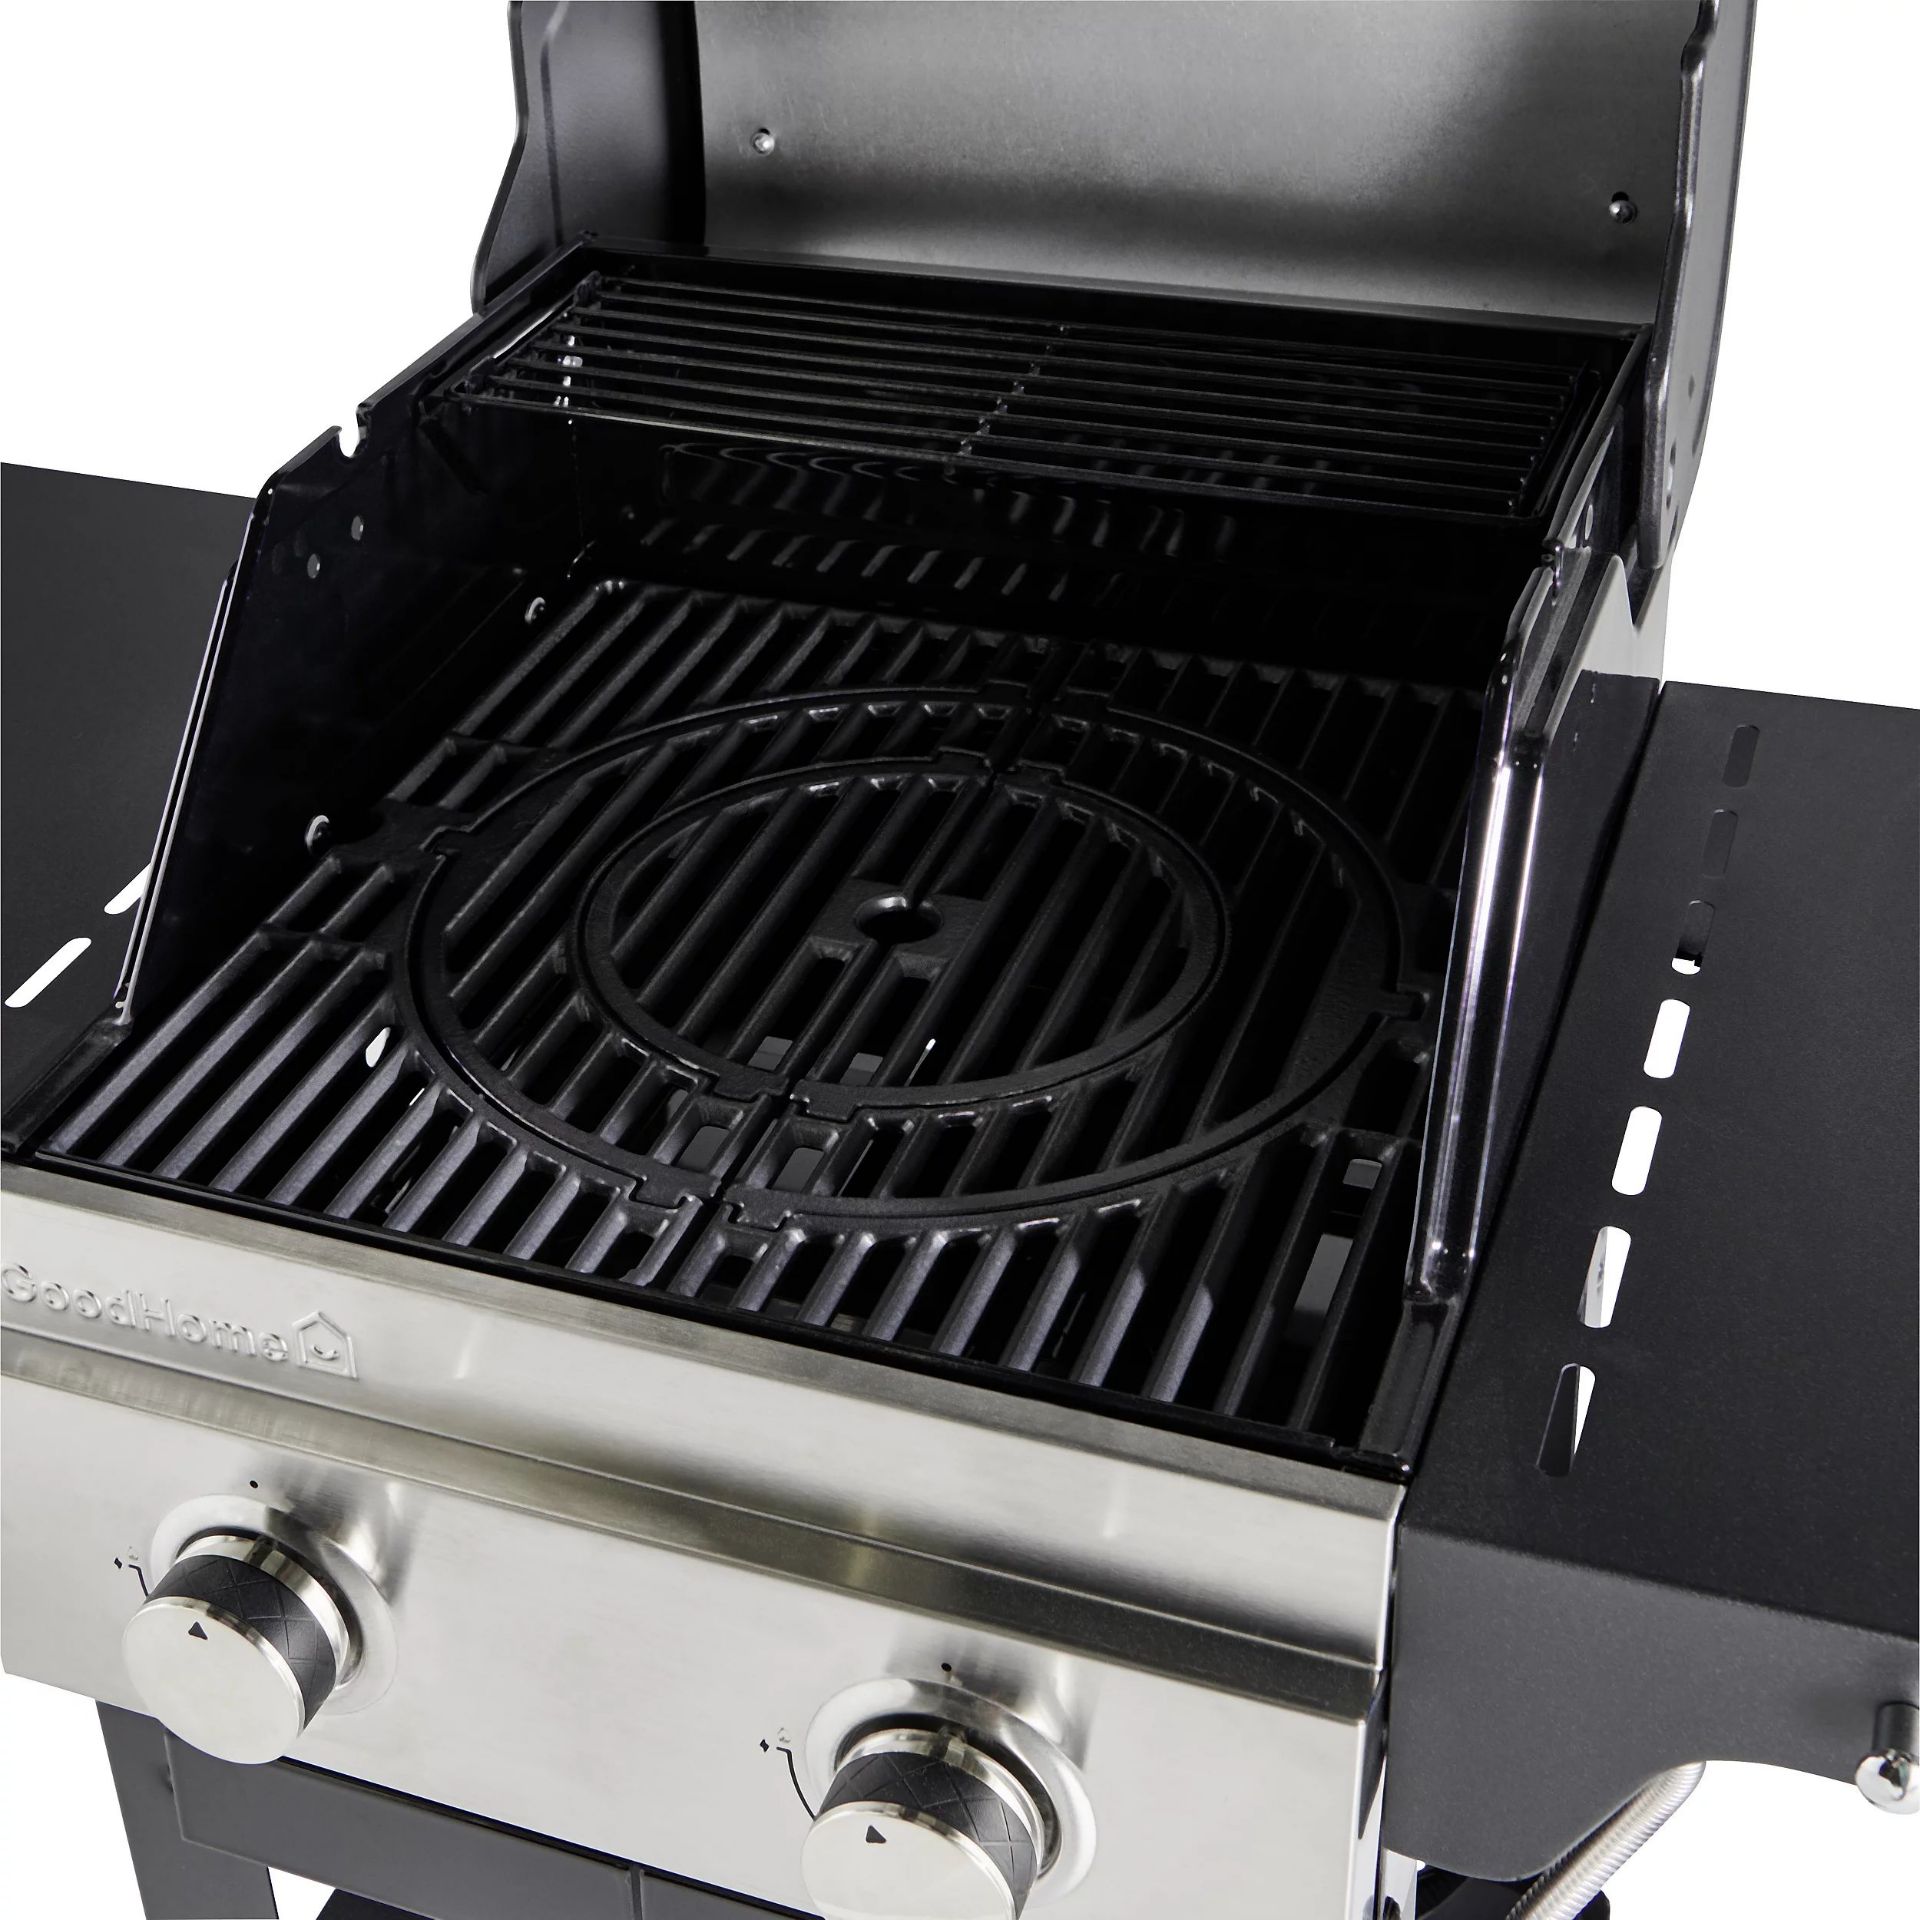 BRAND NEW OWSLEY 2.0 BLACK 2 BURNER GAS BBQ R15-4 - Image 5 of 10